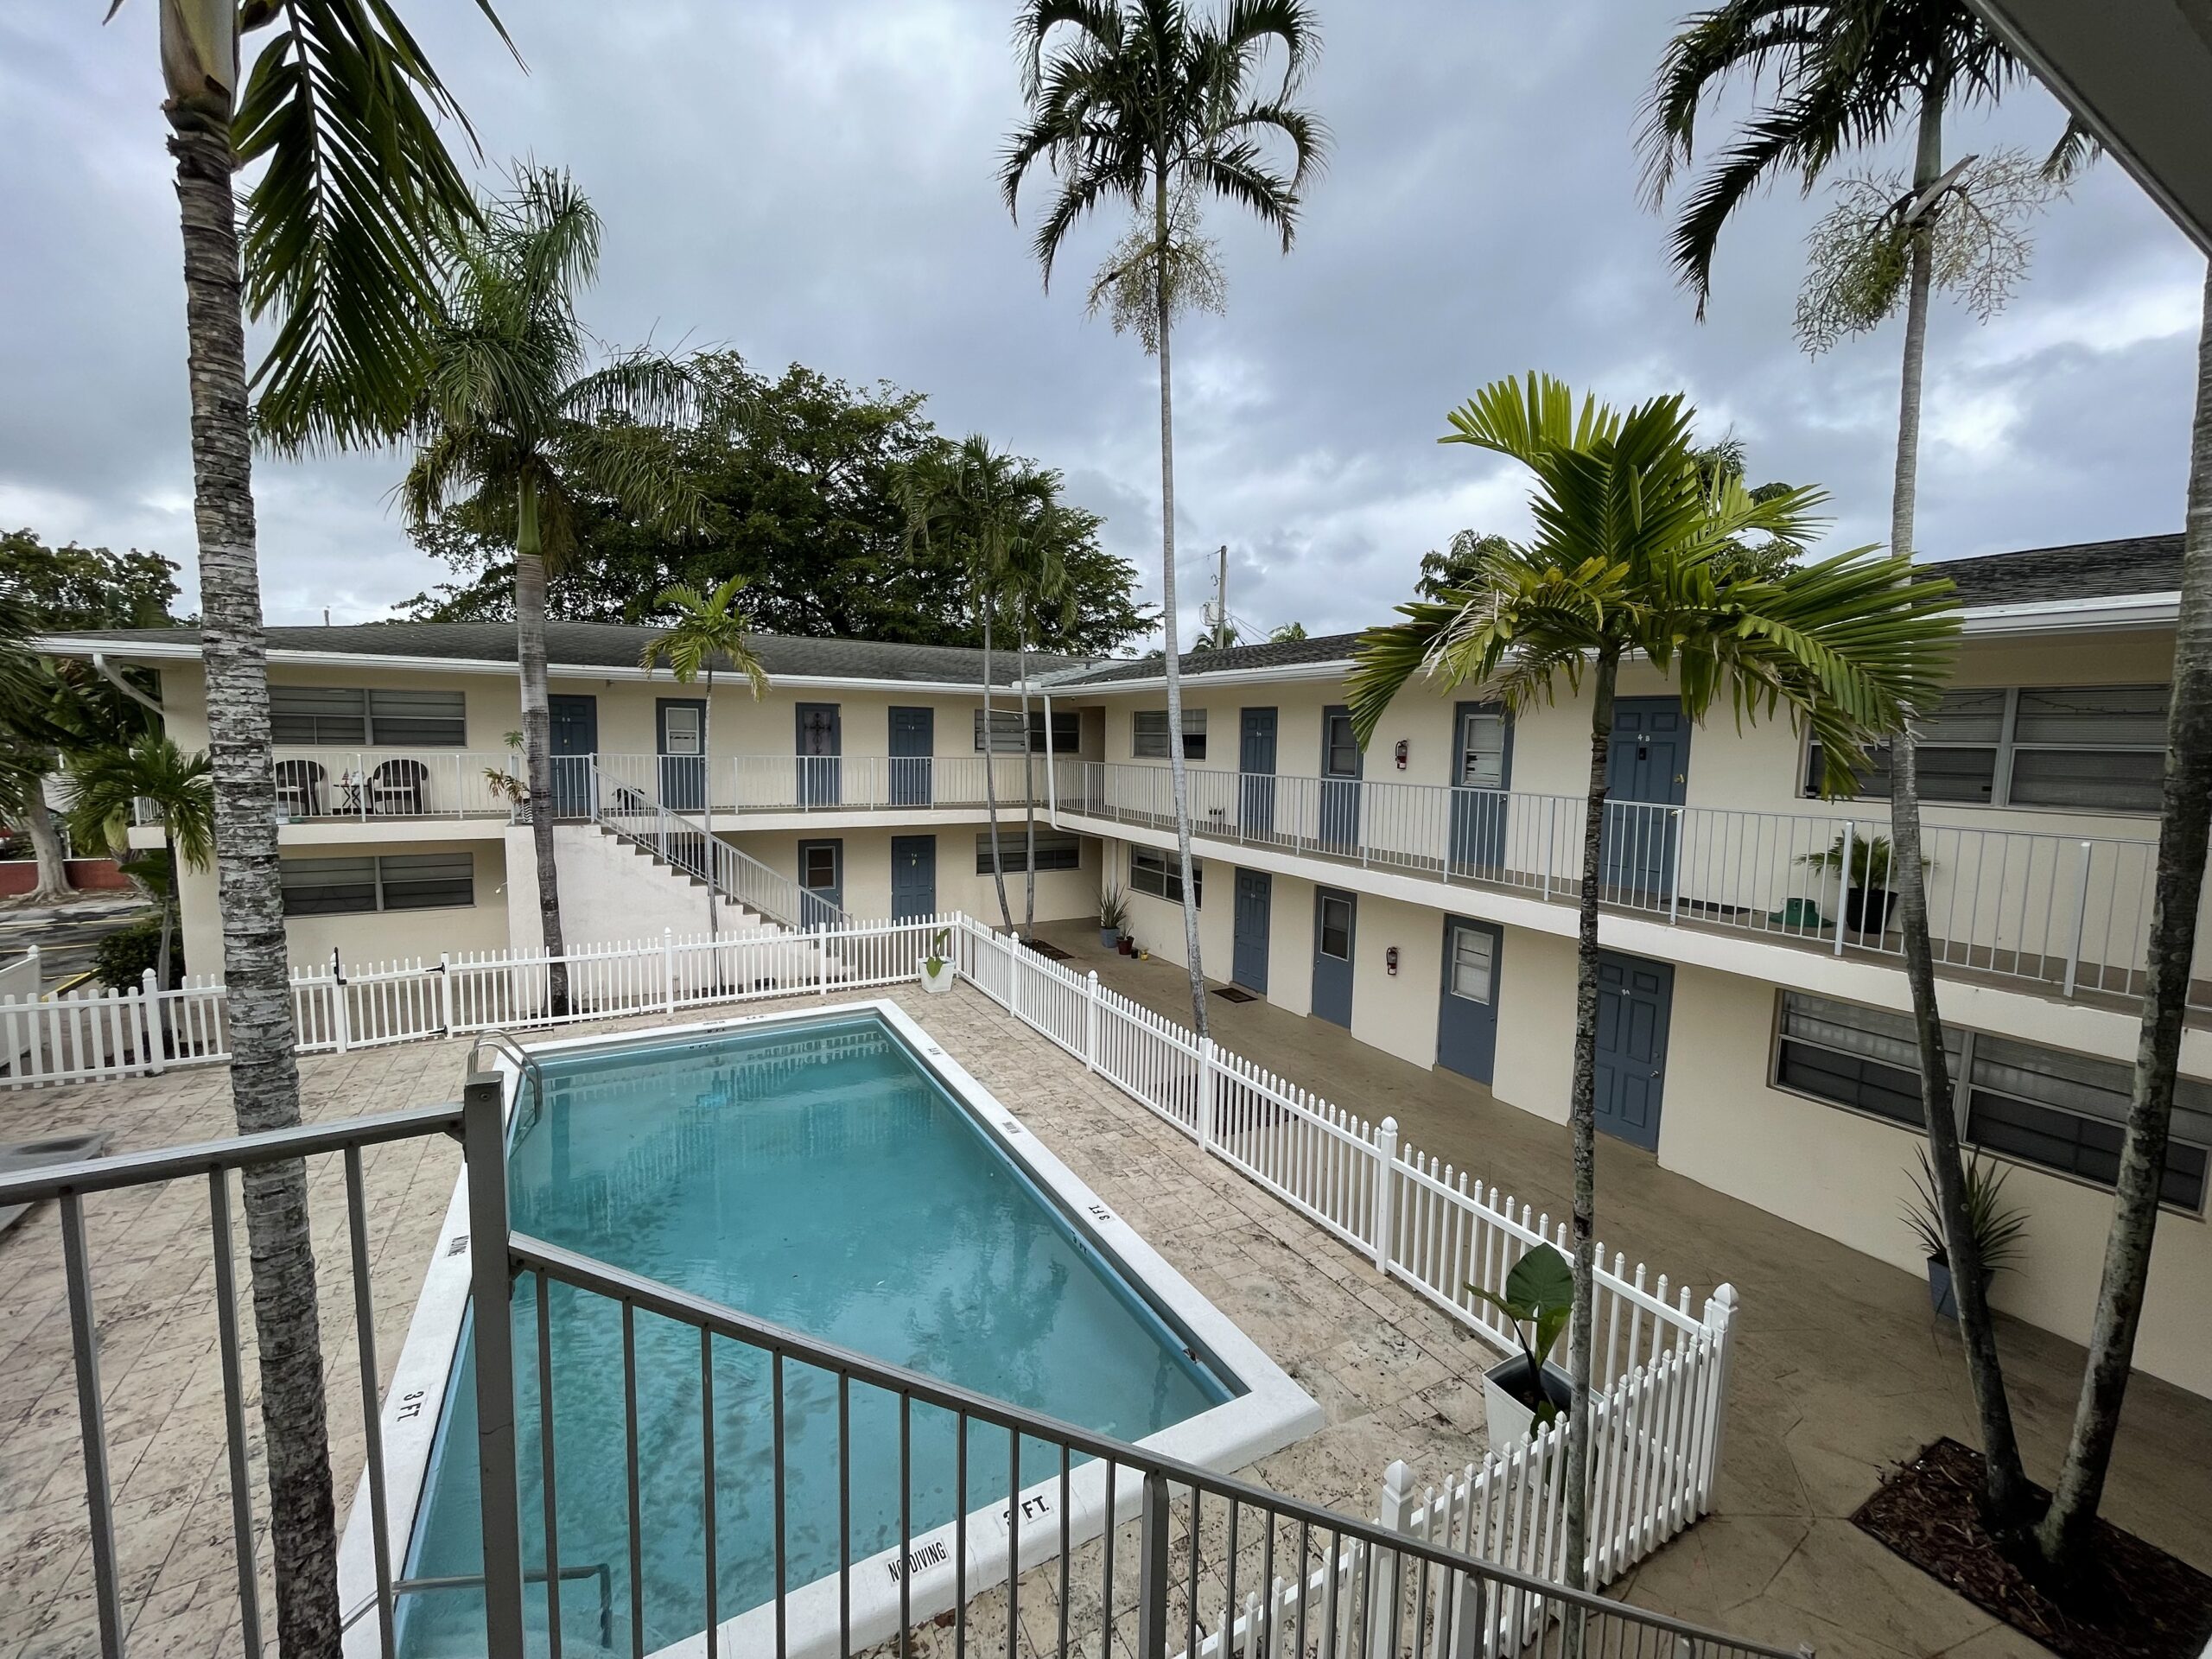 16 UNIT APARTMENT BUILDING IN SOUTH FLORIDA. PERFECT FOR 1031